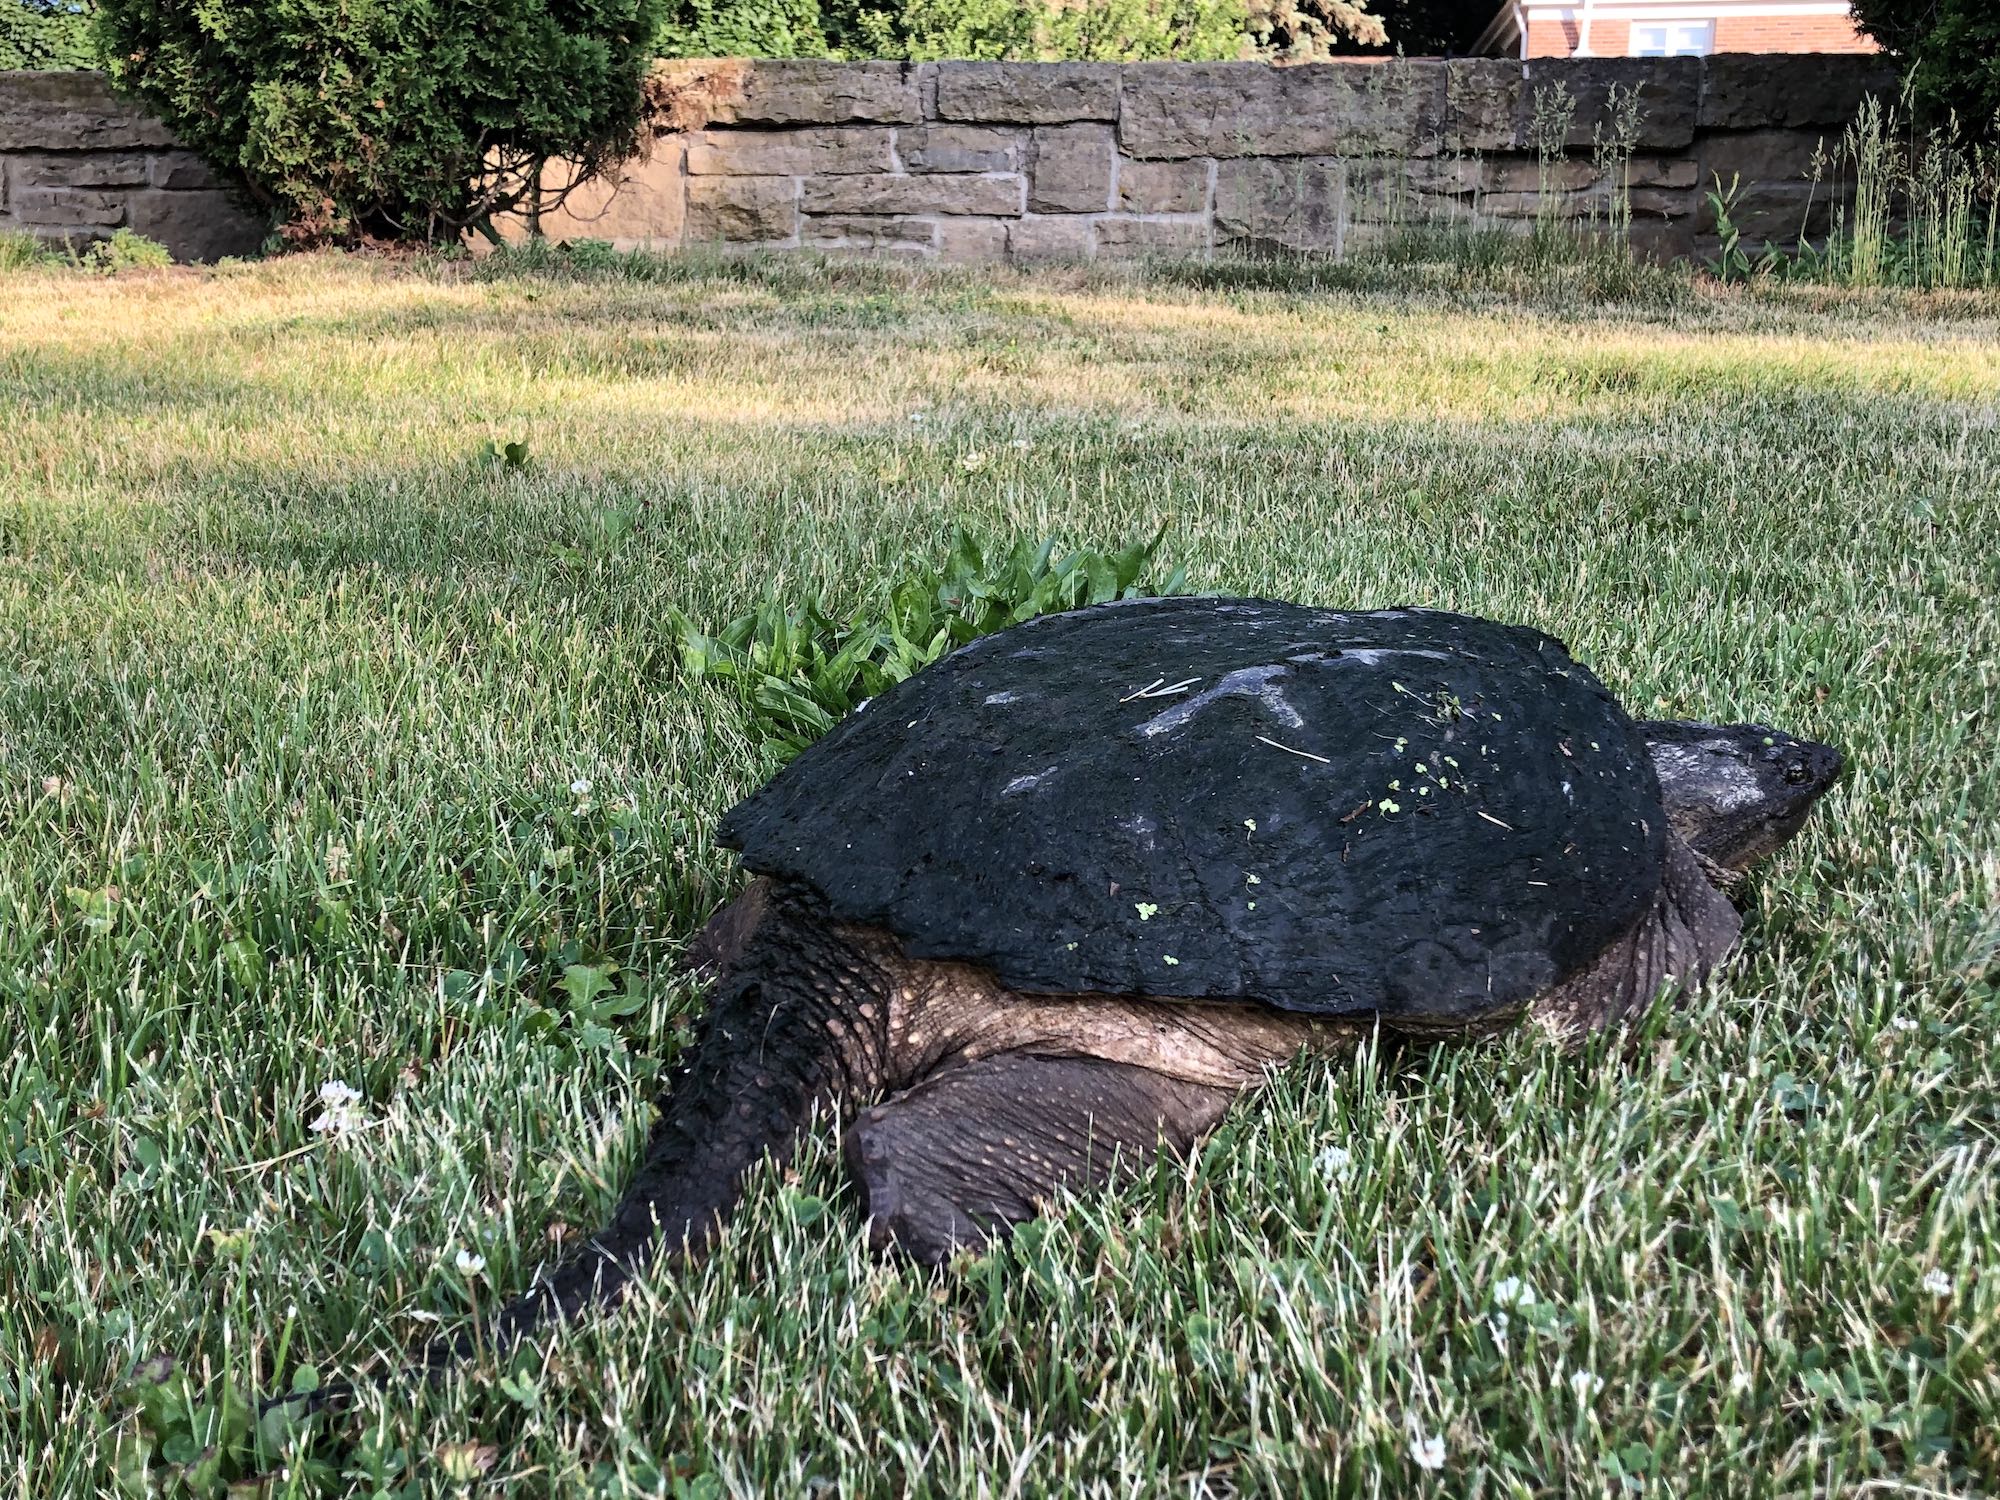 Snapping Turtle in E. Ray Stevens Pond and Aquatic Gardens on corner of Manitou Way and Nakoma Road in Madison, Wisconsin on June 8, 2021.